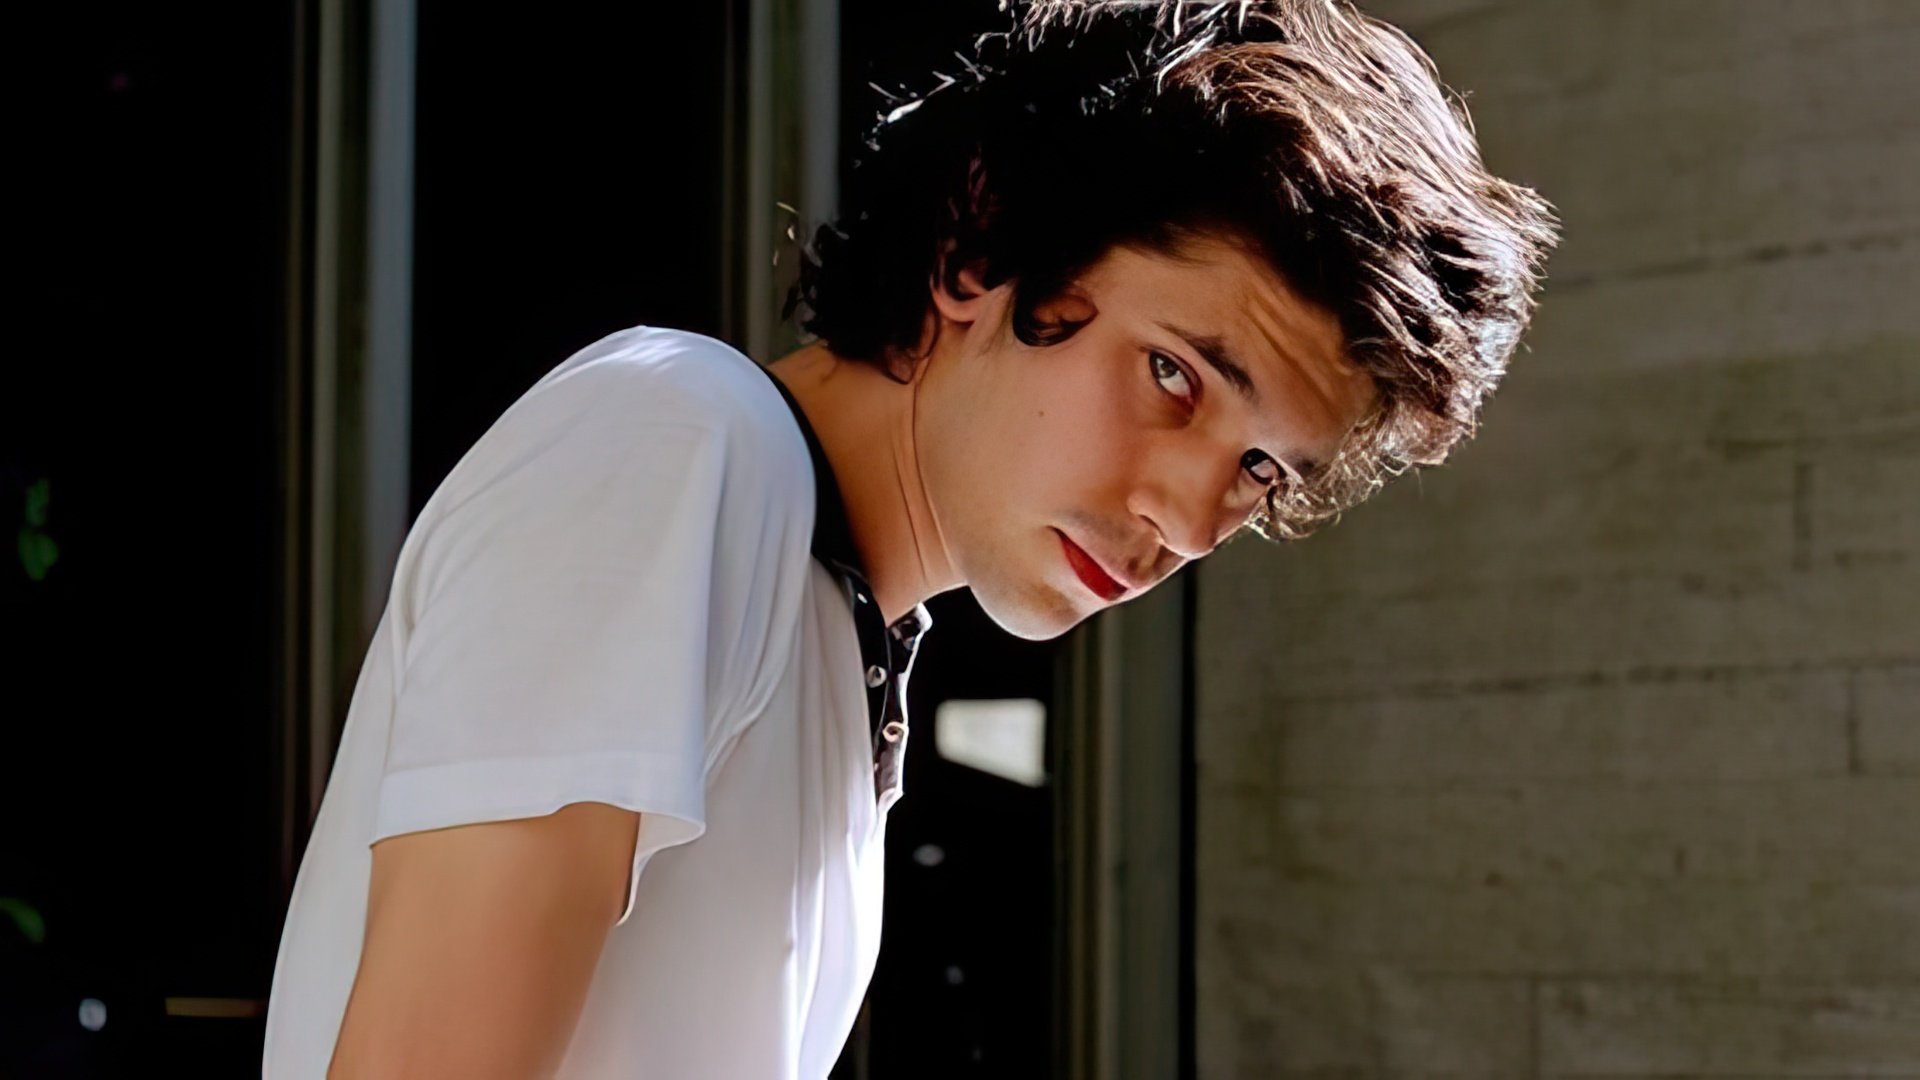 Ben Whishaw in his youth